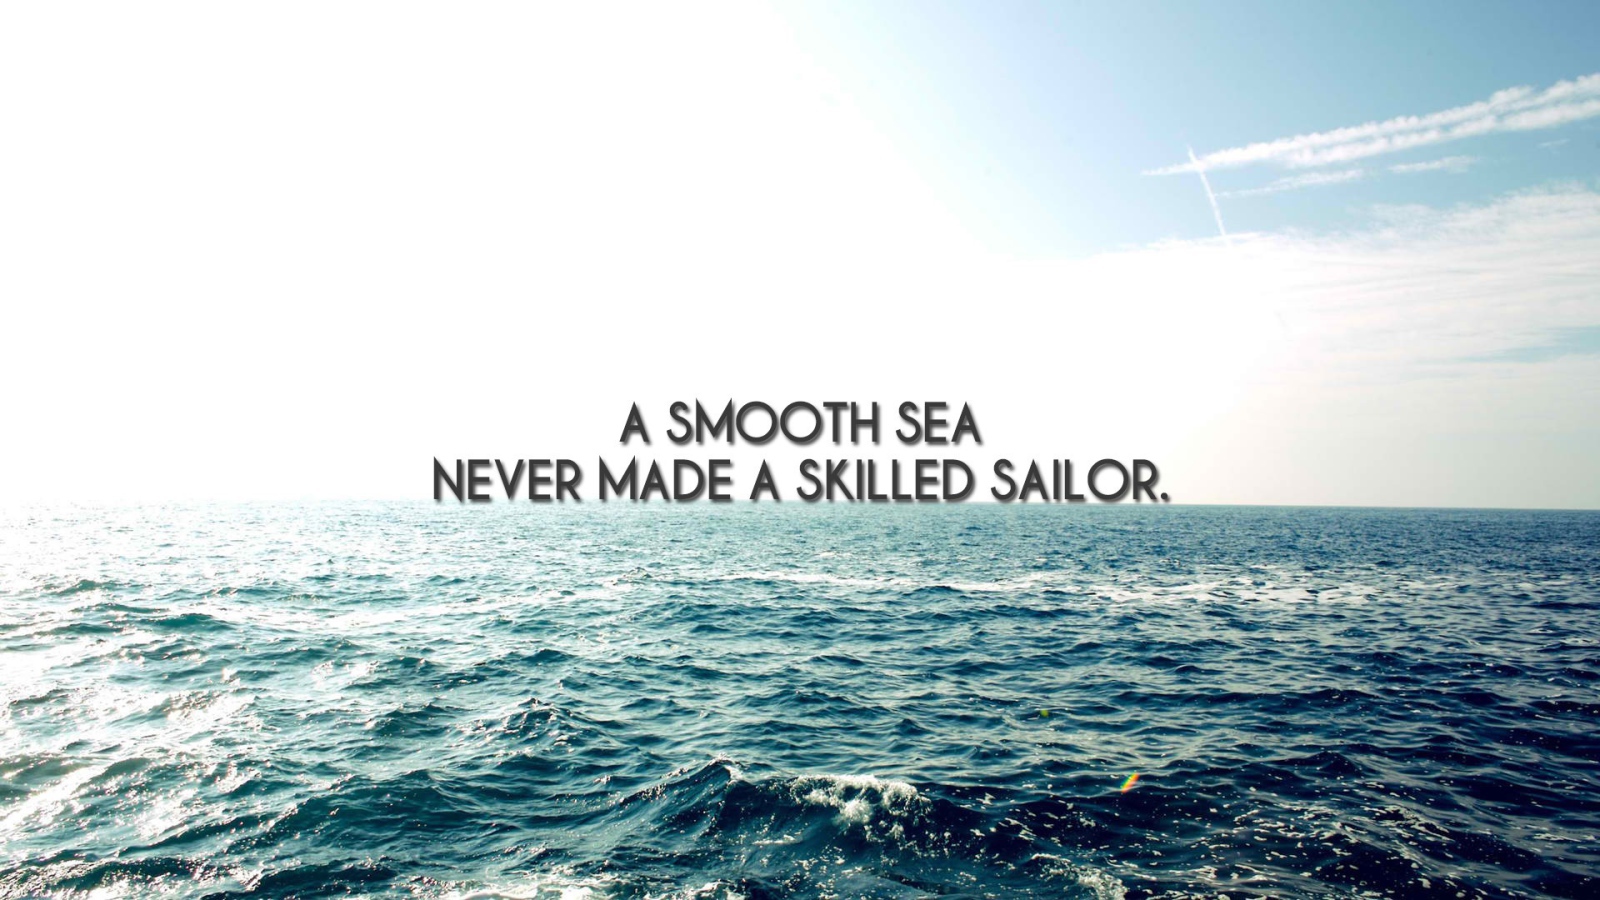 Smooth sea and sailor motivation